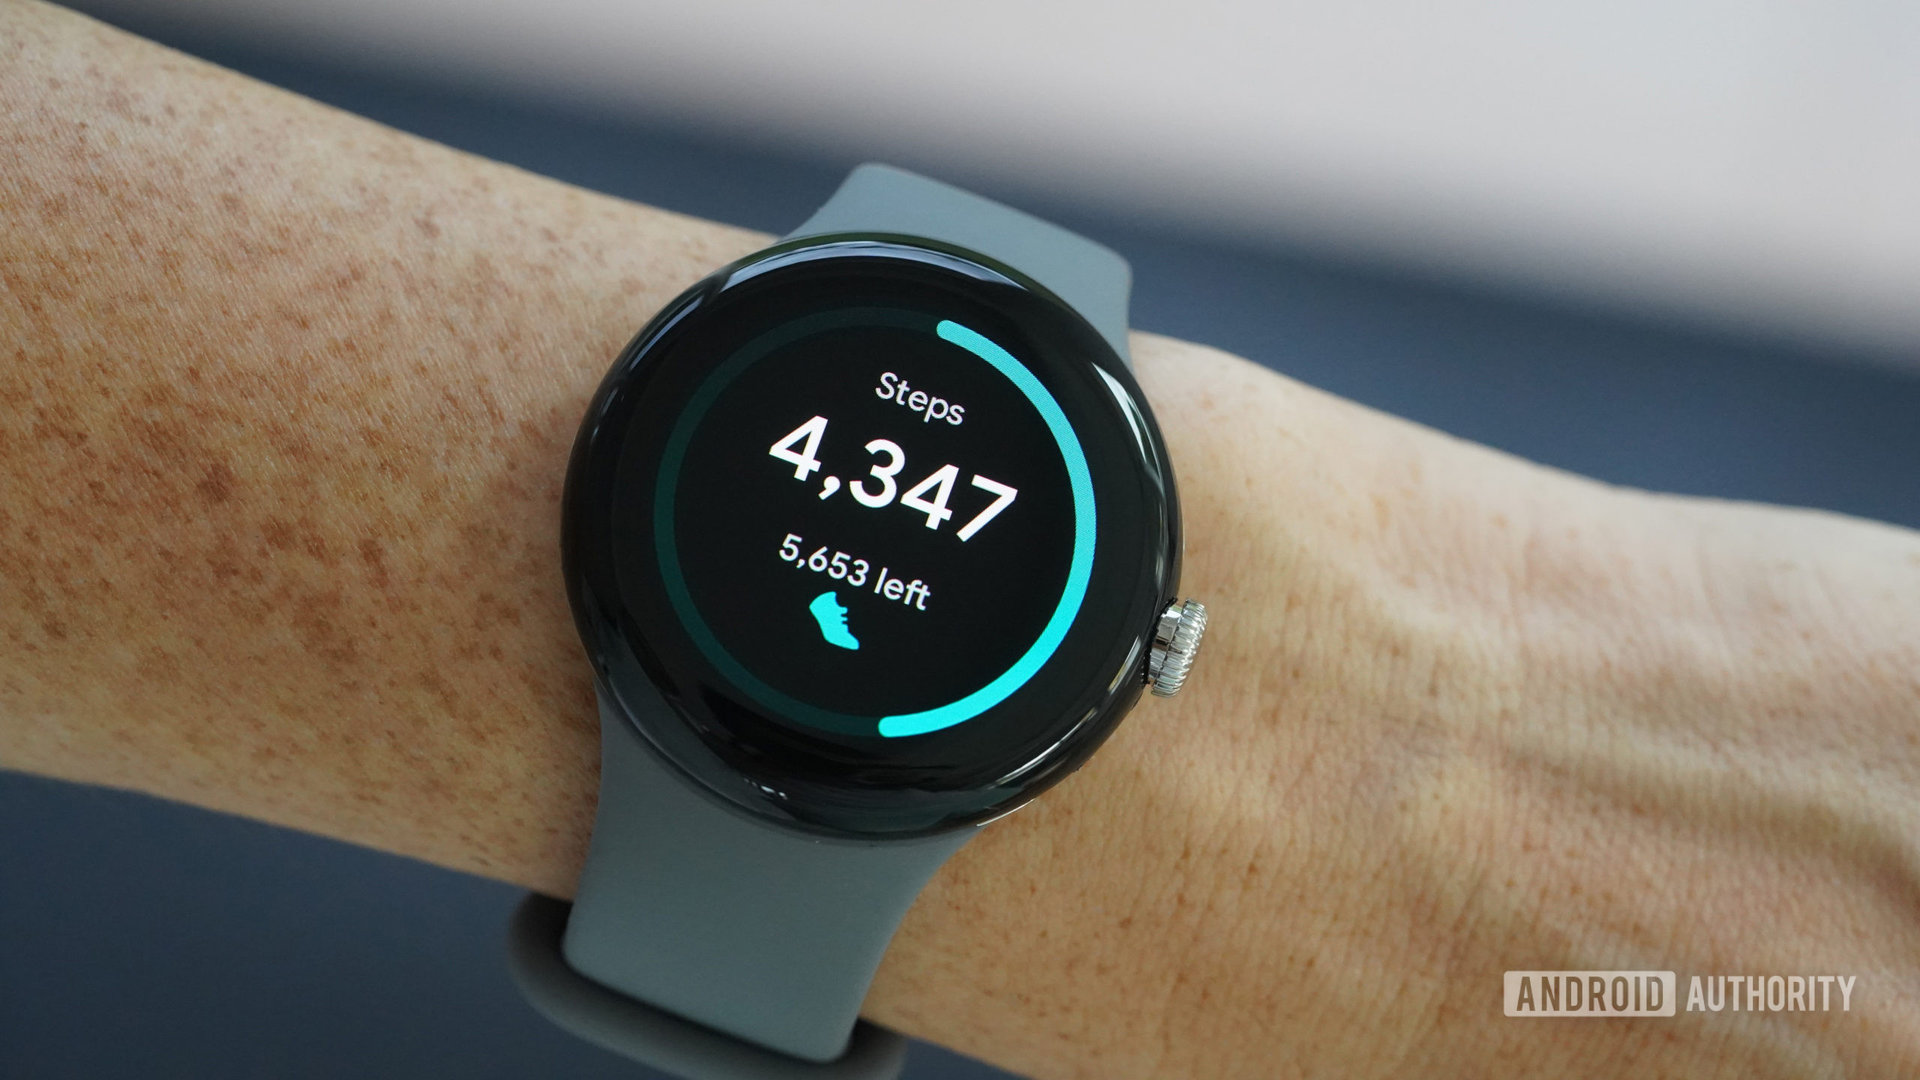 A Google Pixel Watch displays a user's step count.